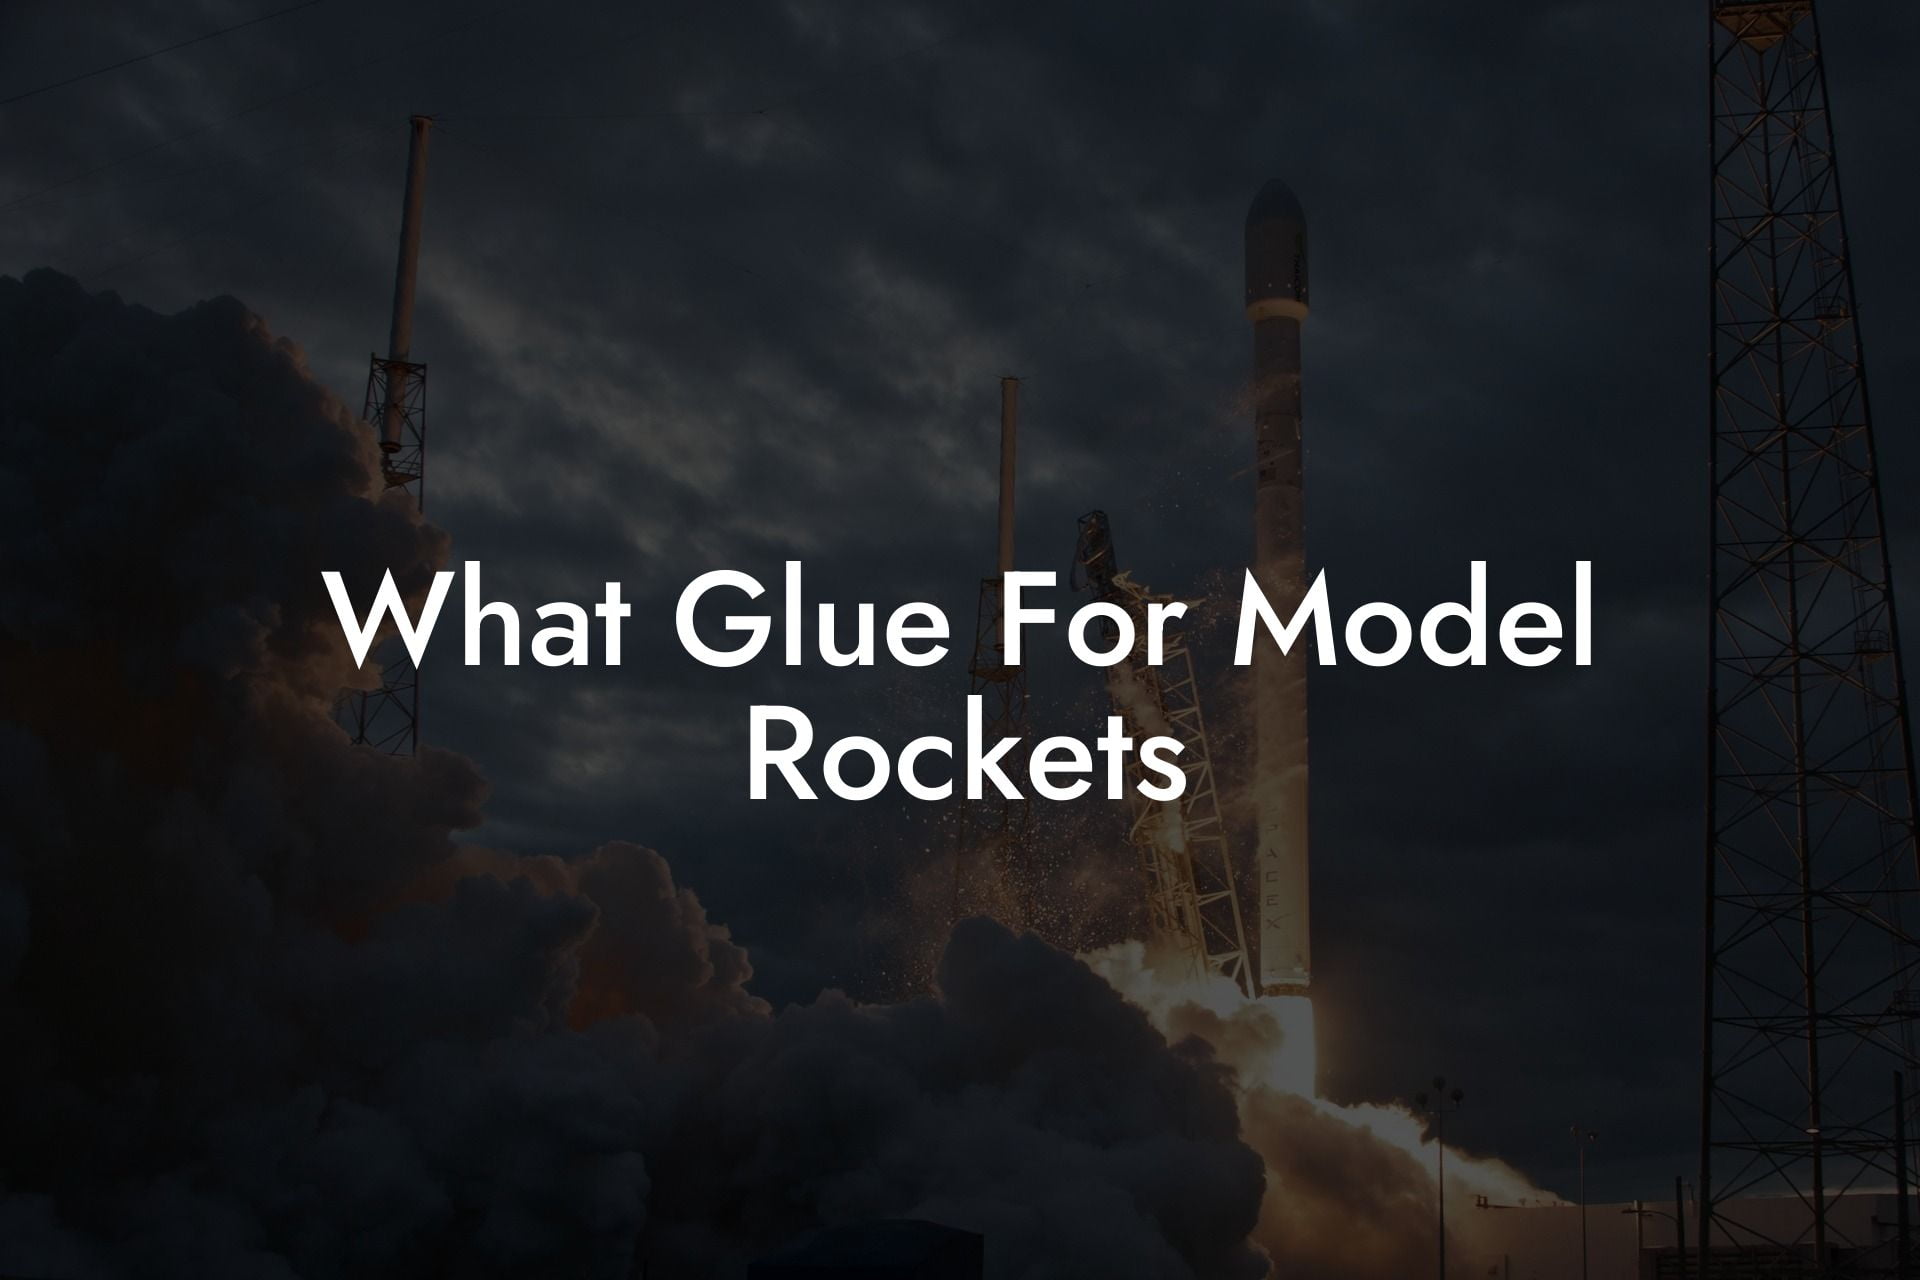 What Glue For Model Rockets